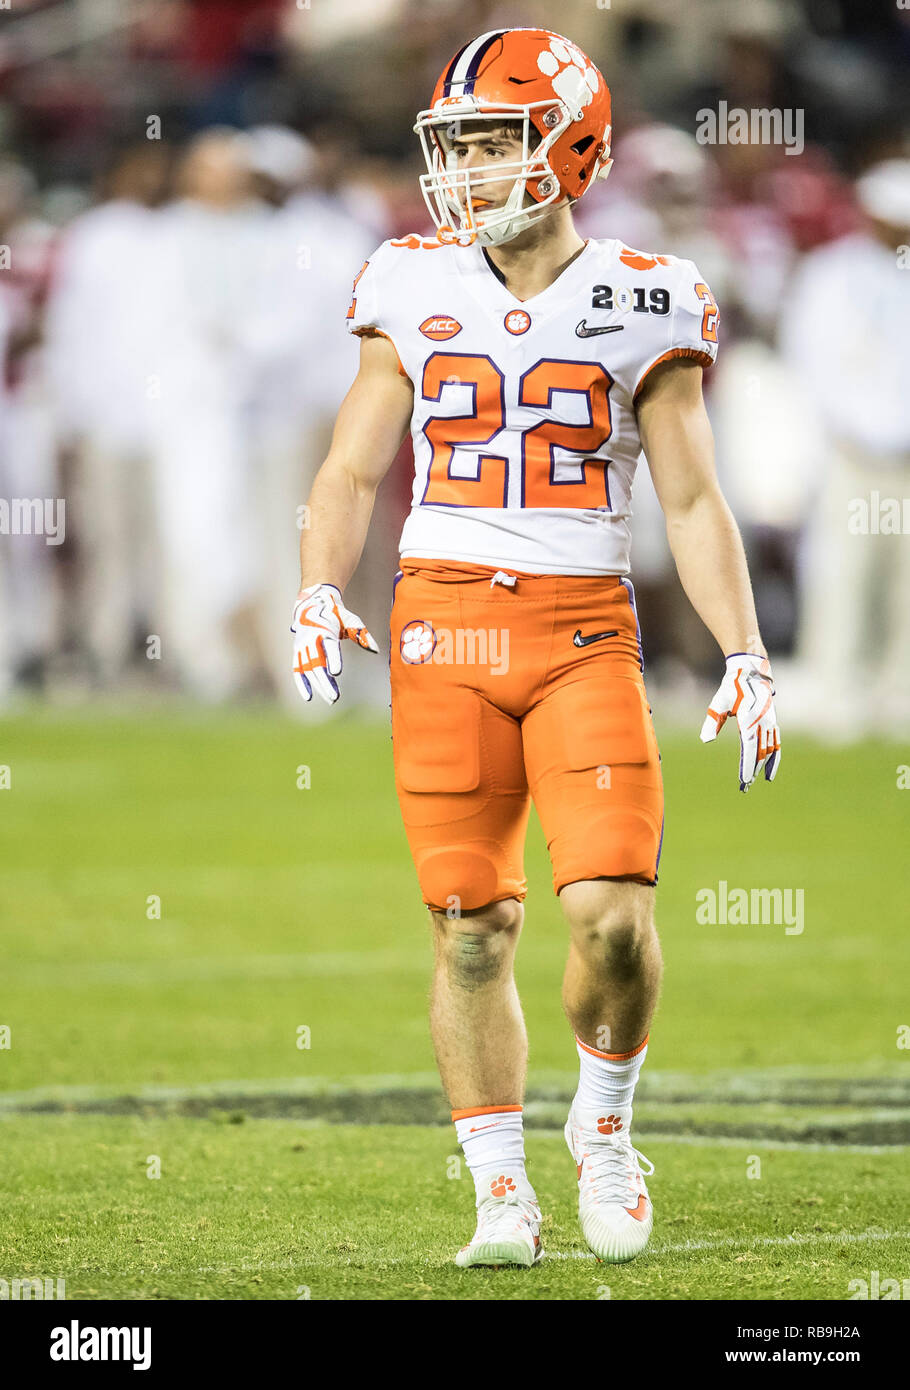 Santa Clara, California, USA. 07th Jan, 2019. Clemson wide receiver Will  Swinney (22) during College Football Playoff National Championship game  action between the Clemson Tigers and Alabama Crimson Tide at Levi's Stadium